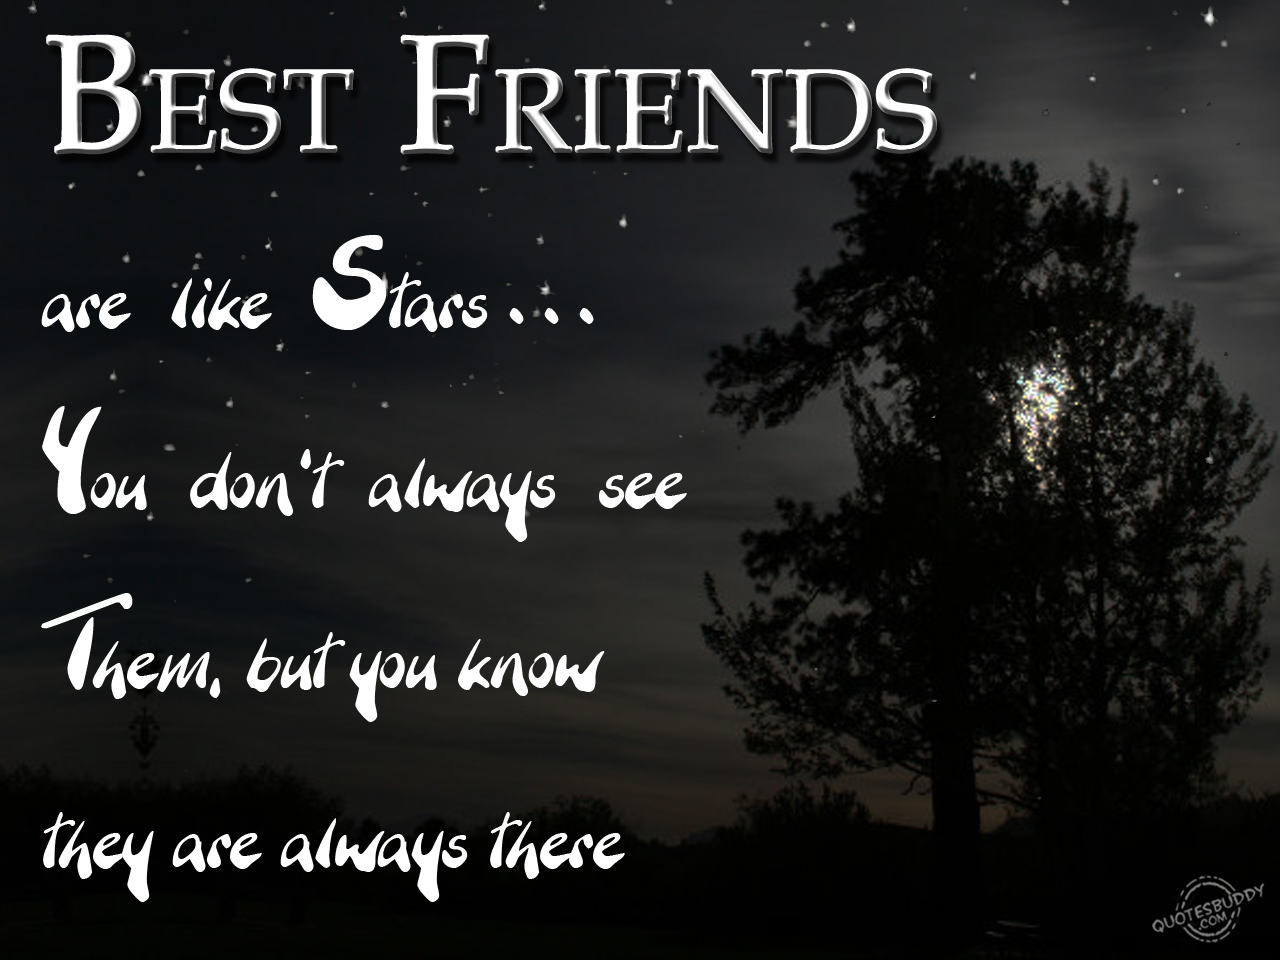 Friendship Quote Pic
 quotation on love life friendship